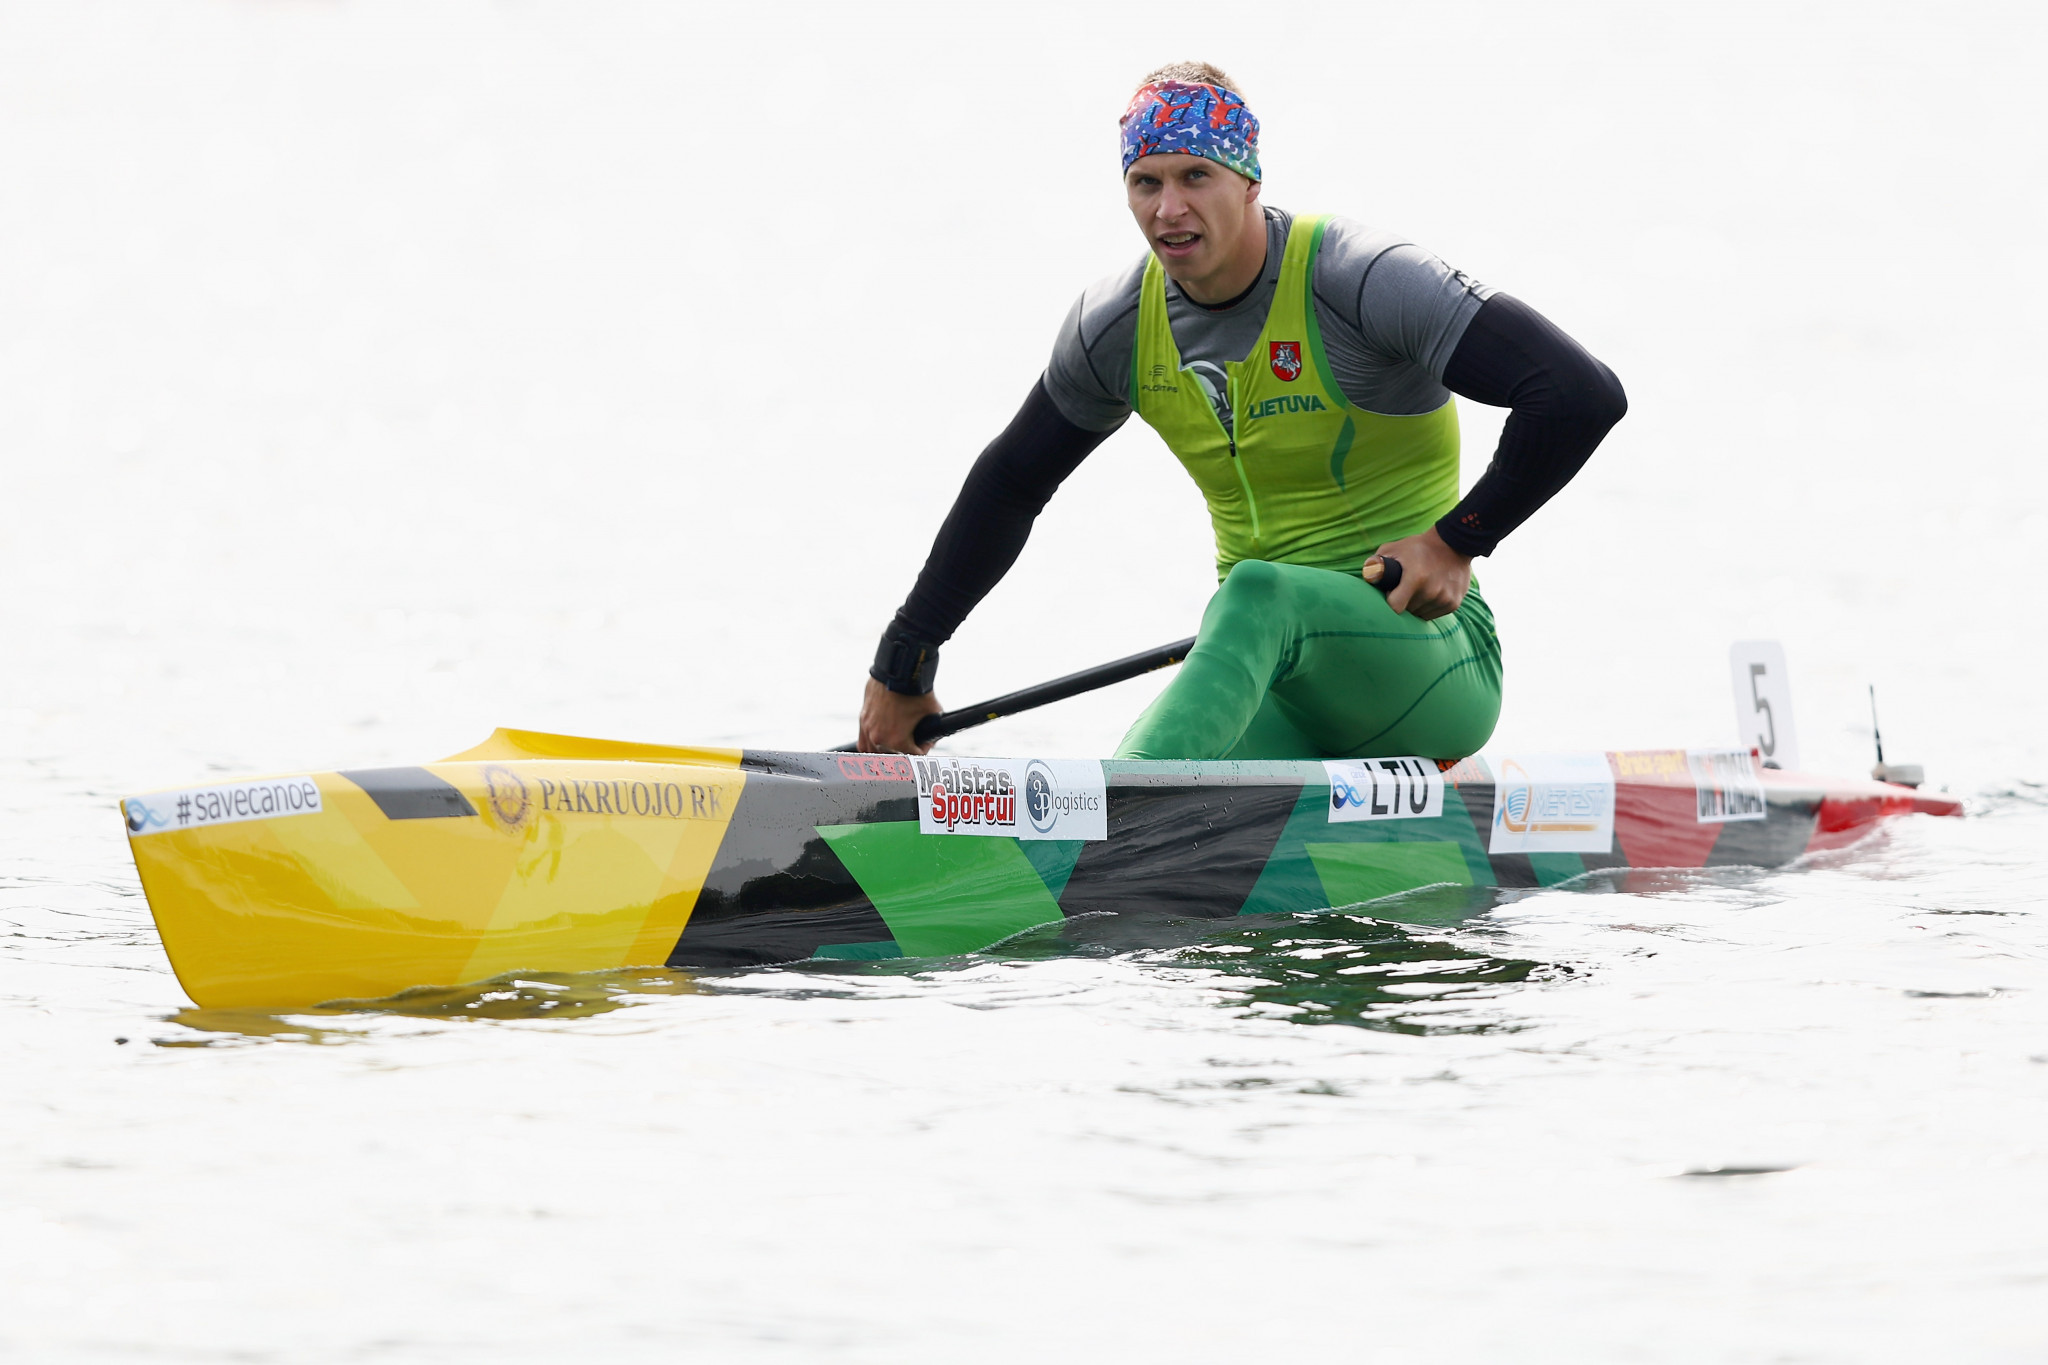 "Underdog" Chen eyes Tokyo 2020 place after success in canoe sprint heats in Russia